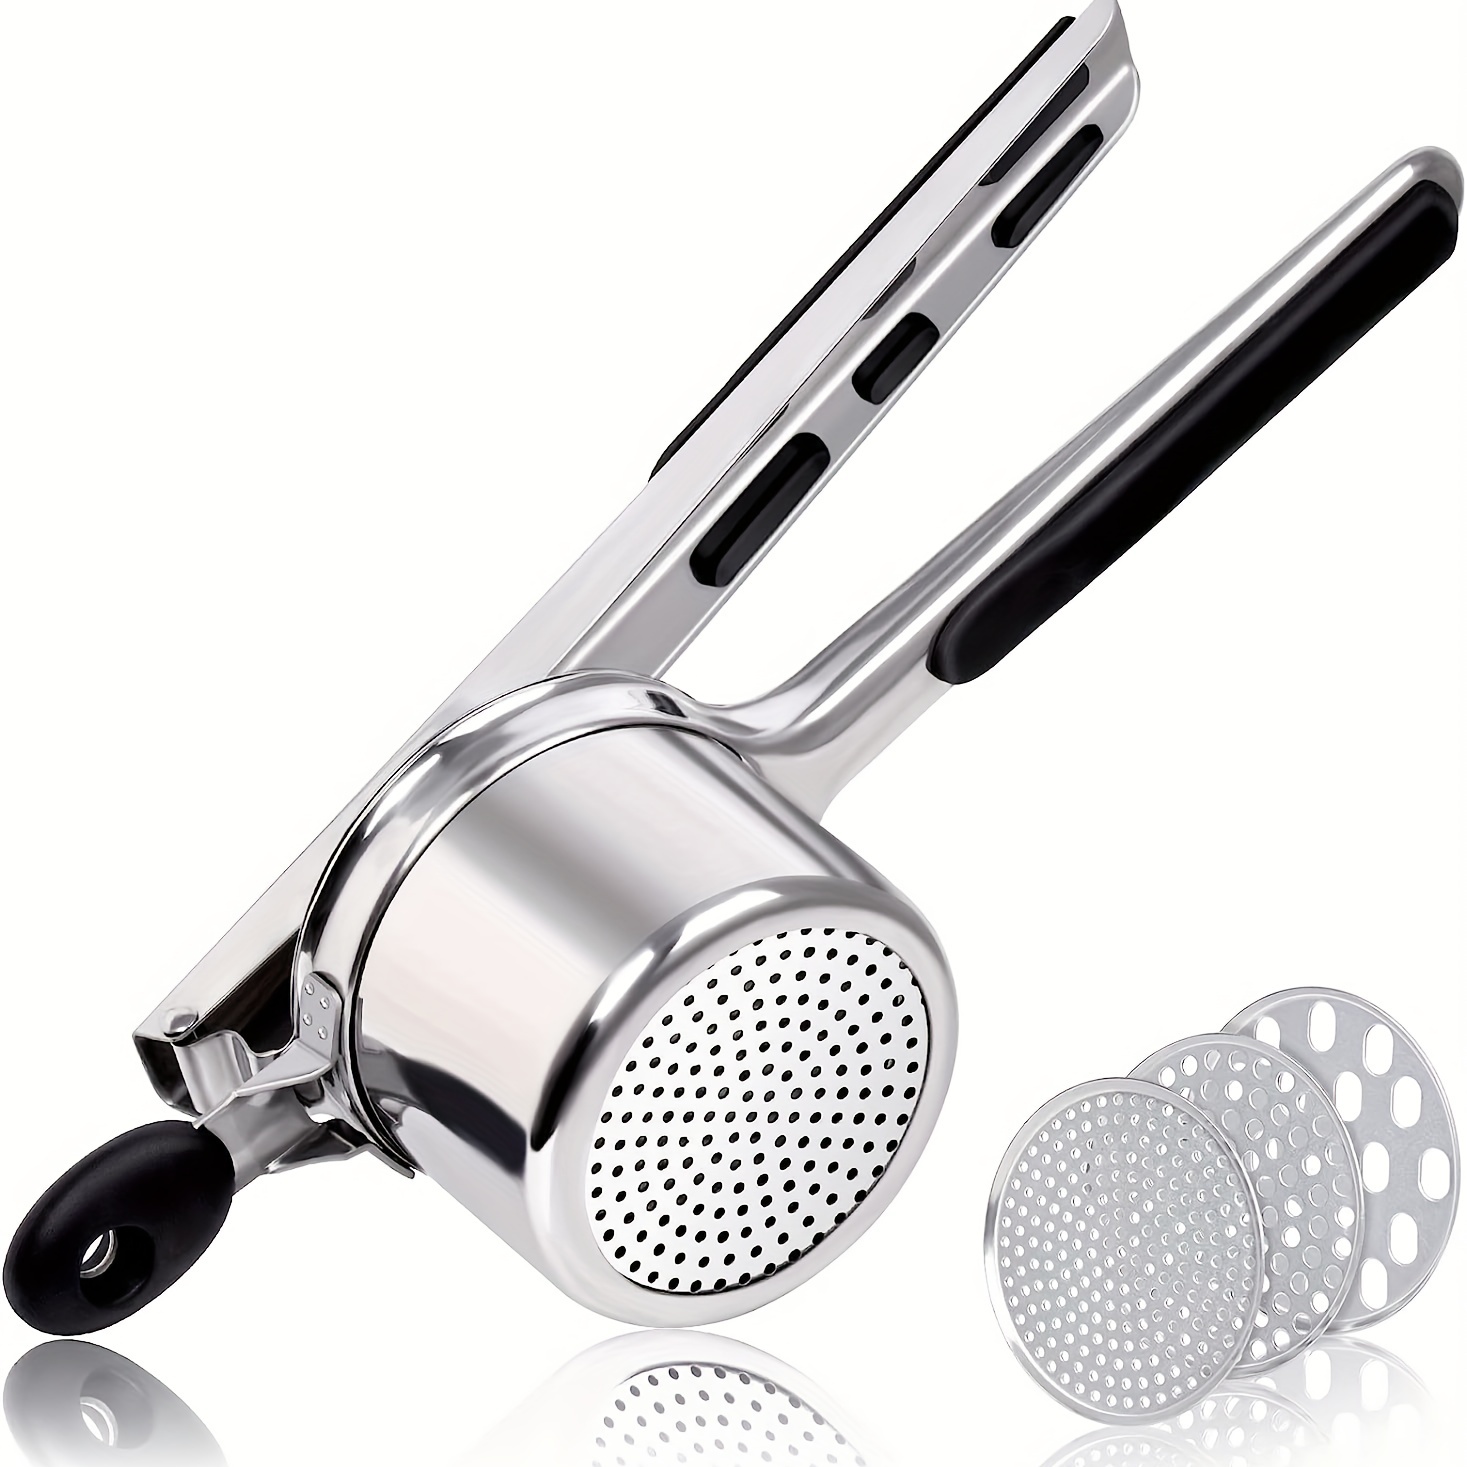 Choice 22 Heavy-Duty Stainless Steel Potato Ricer